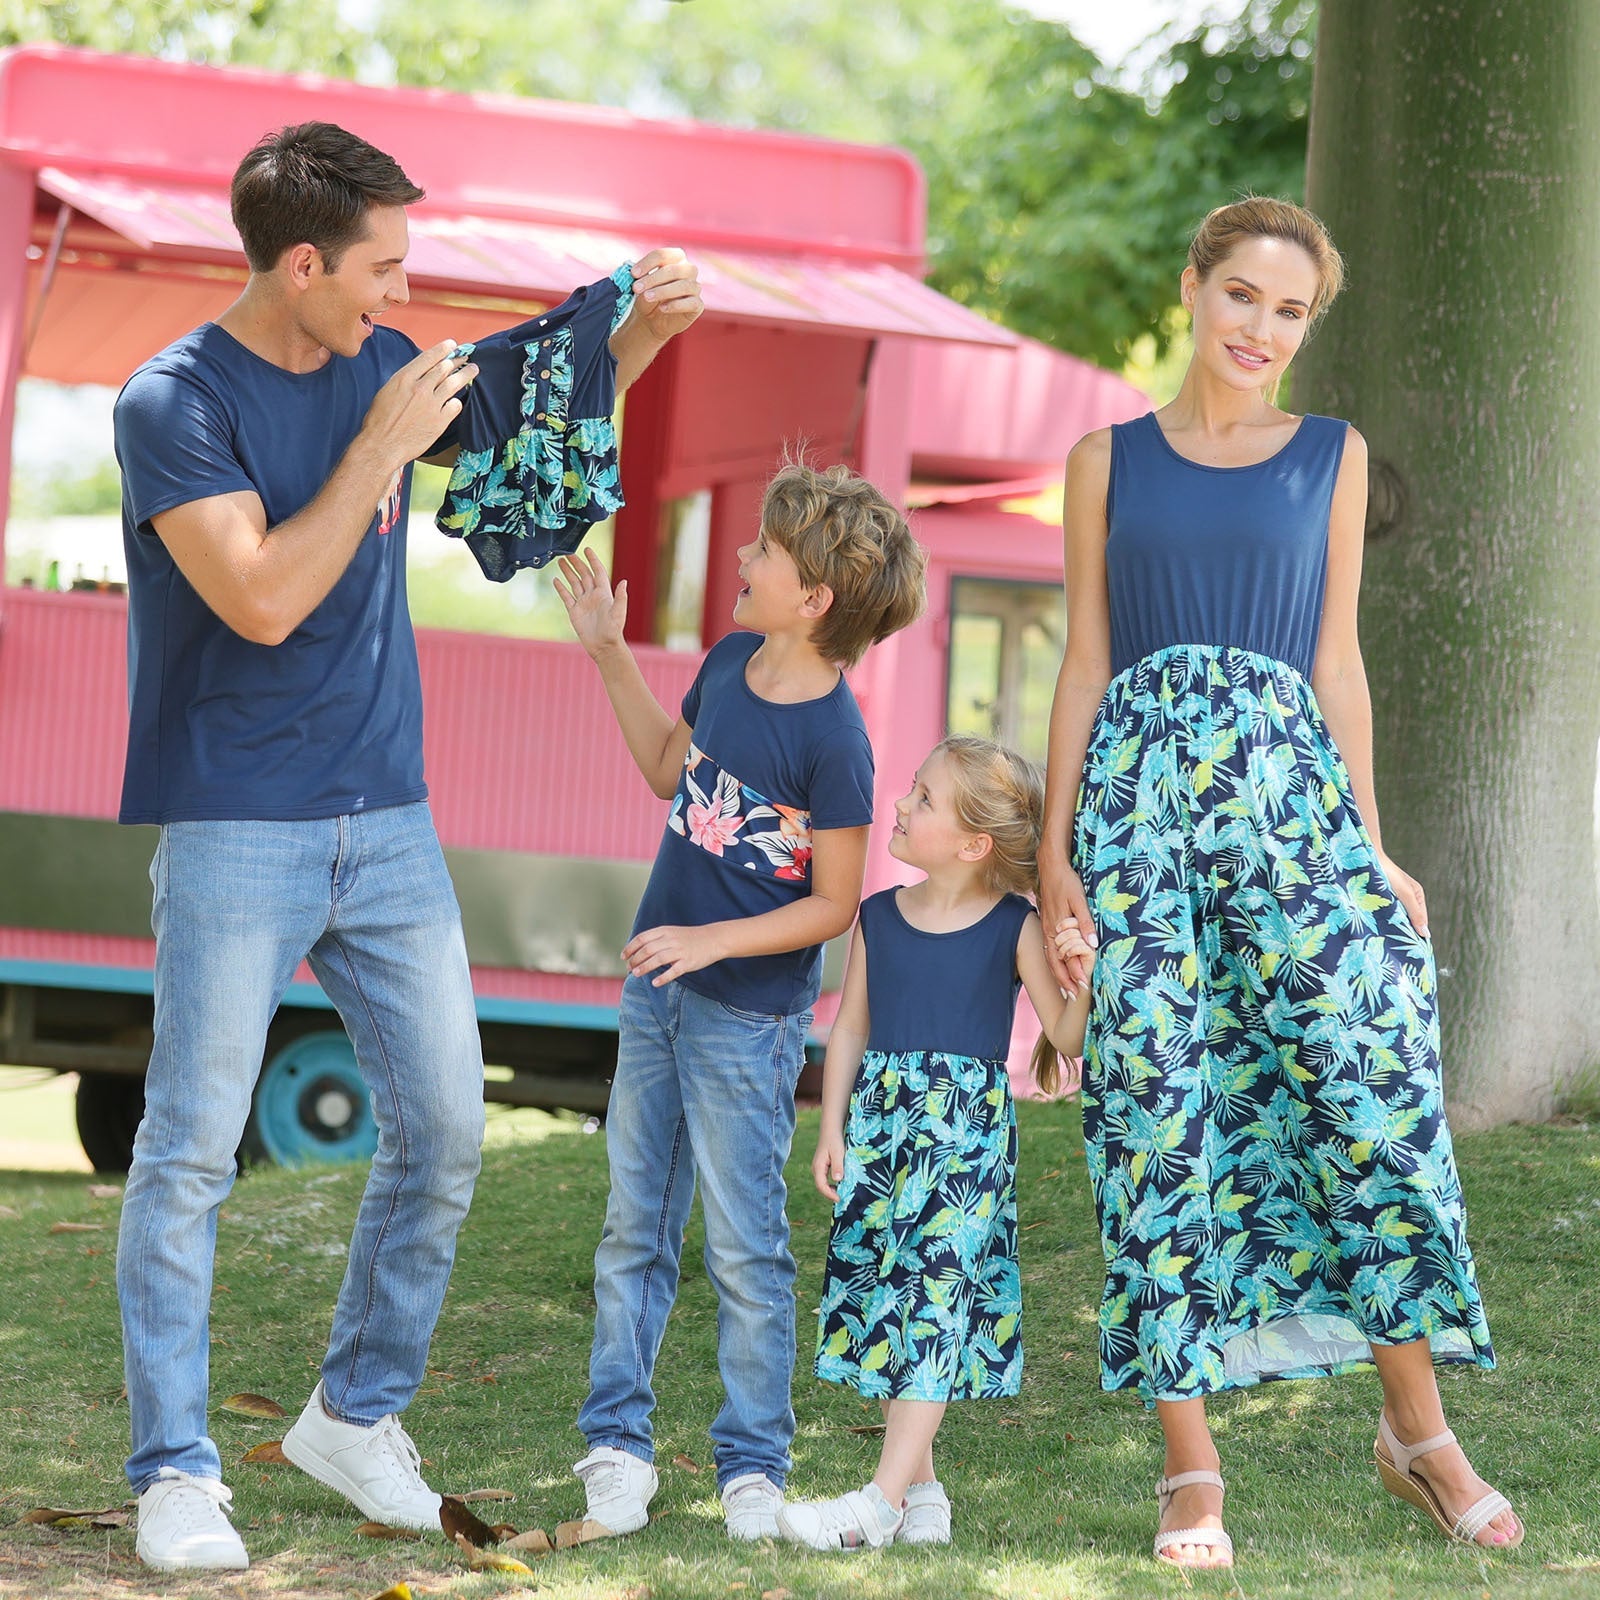 Family Matching Floral Print Dresses & T-shirts Sets